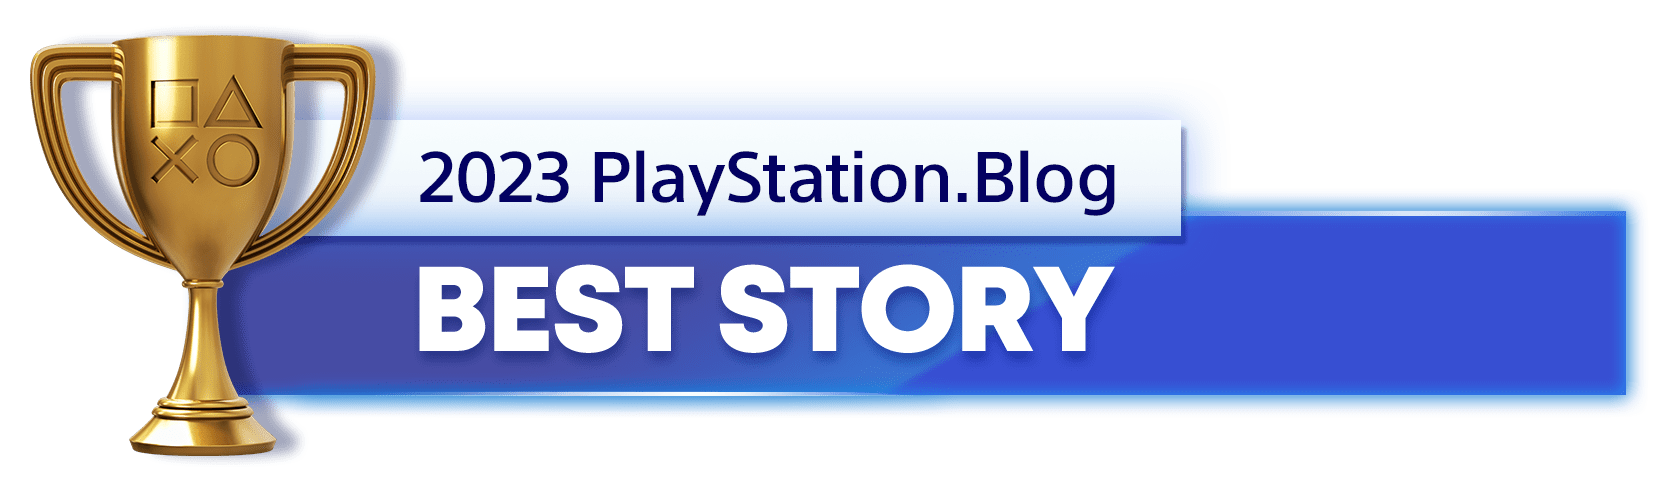 Gold Trophy for the 2023 PlayStation Blog Best Story Winner